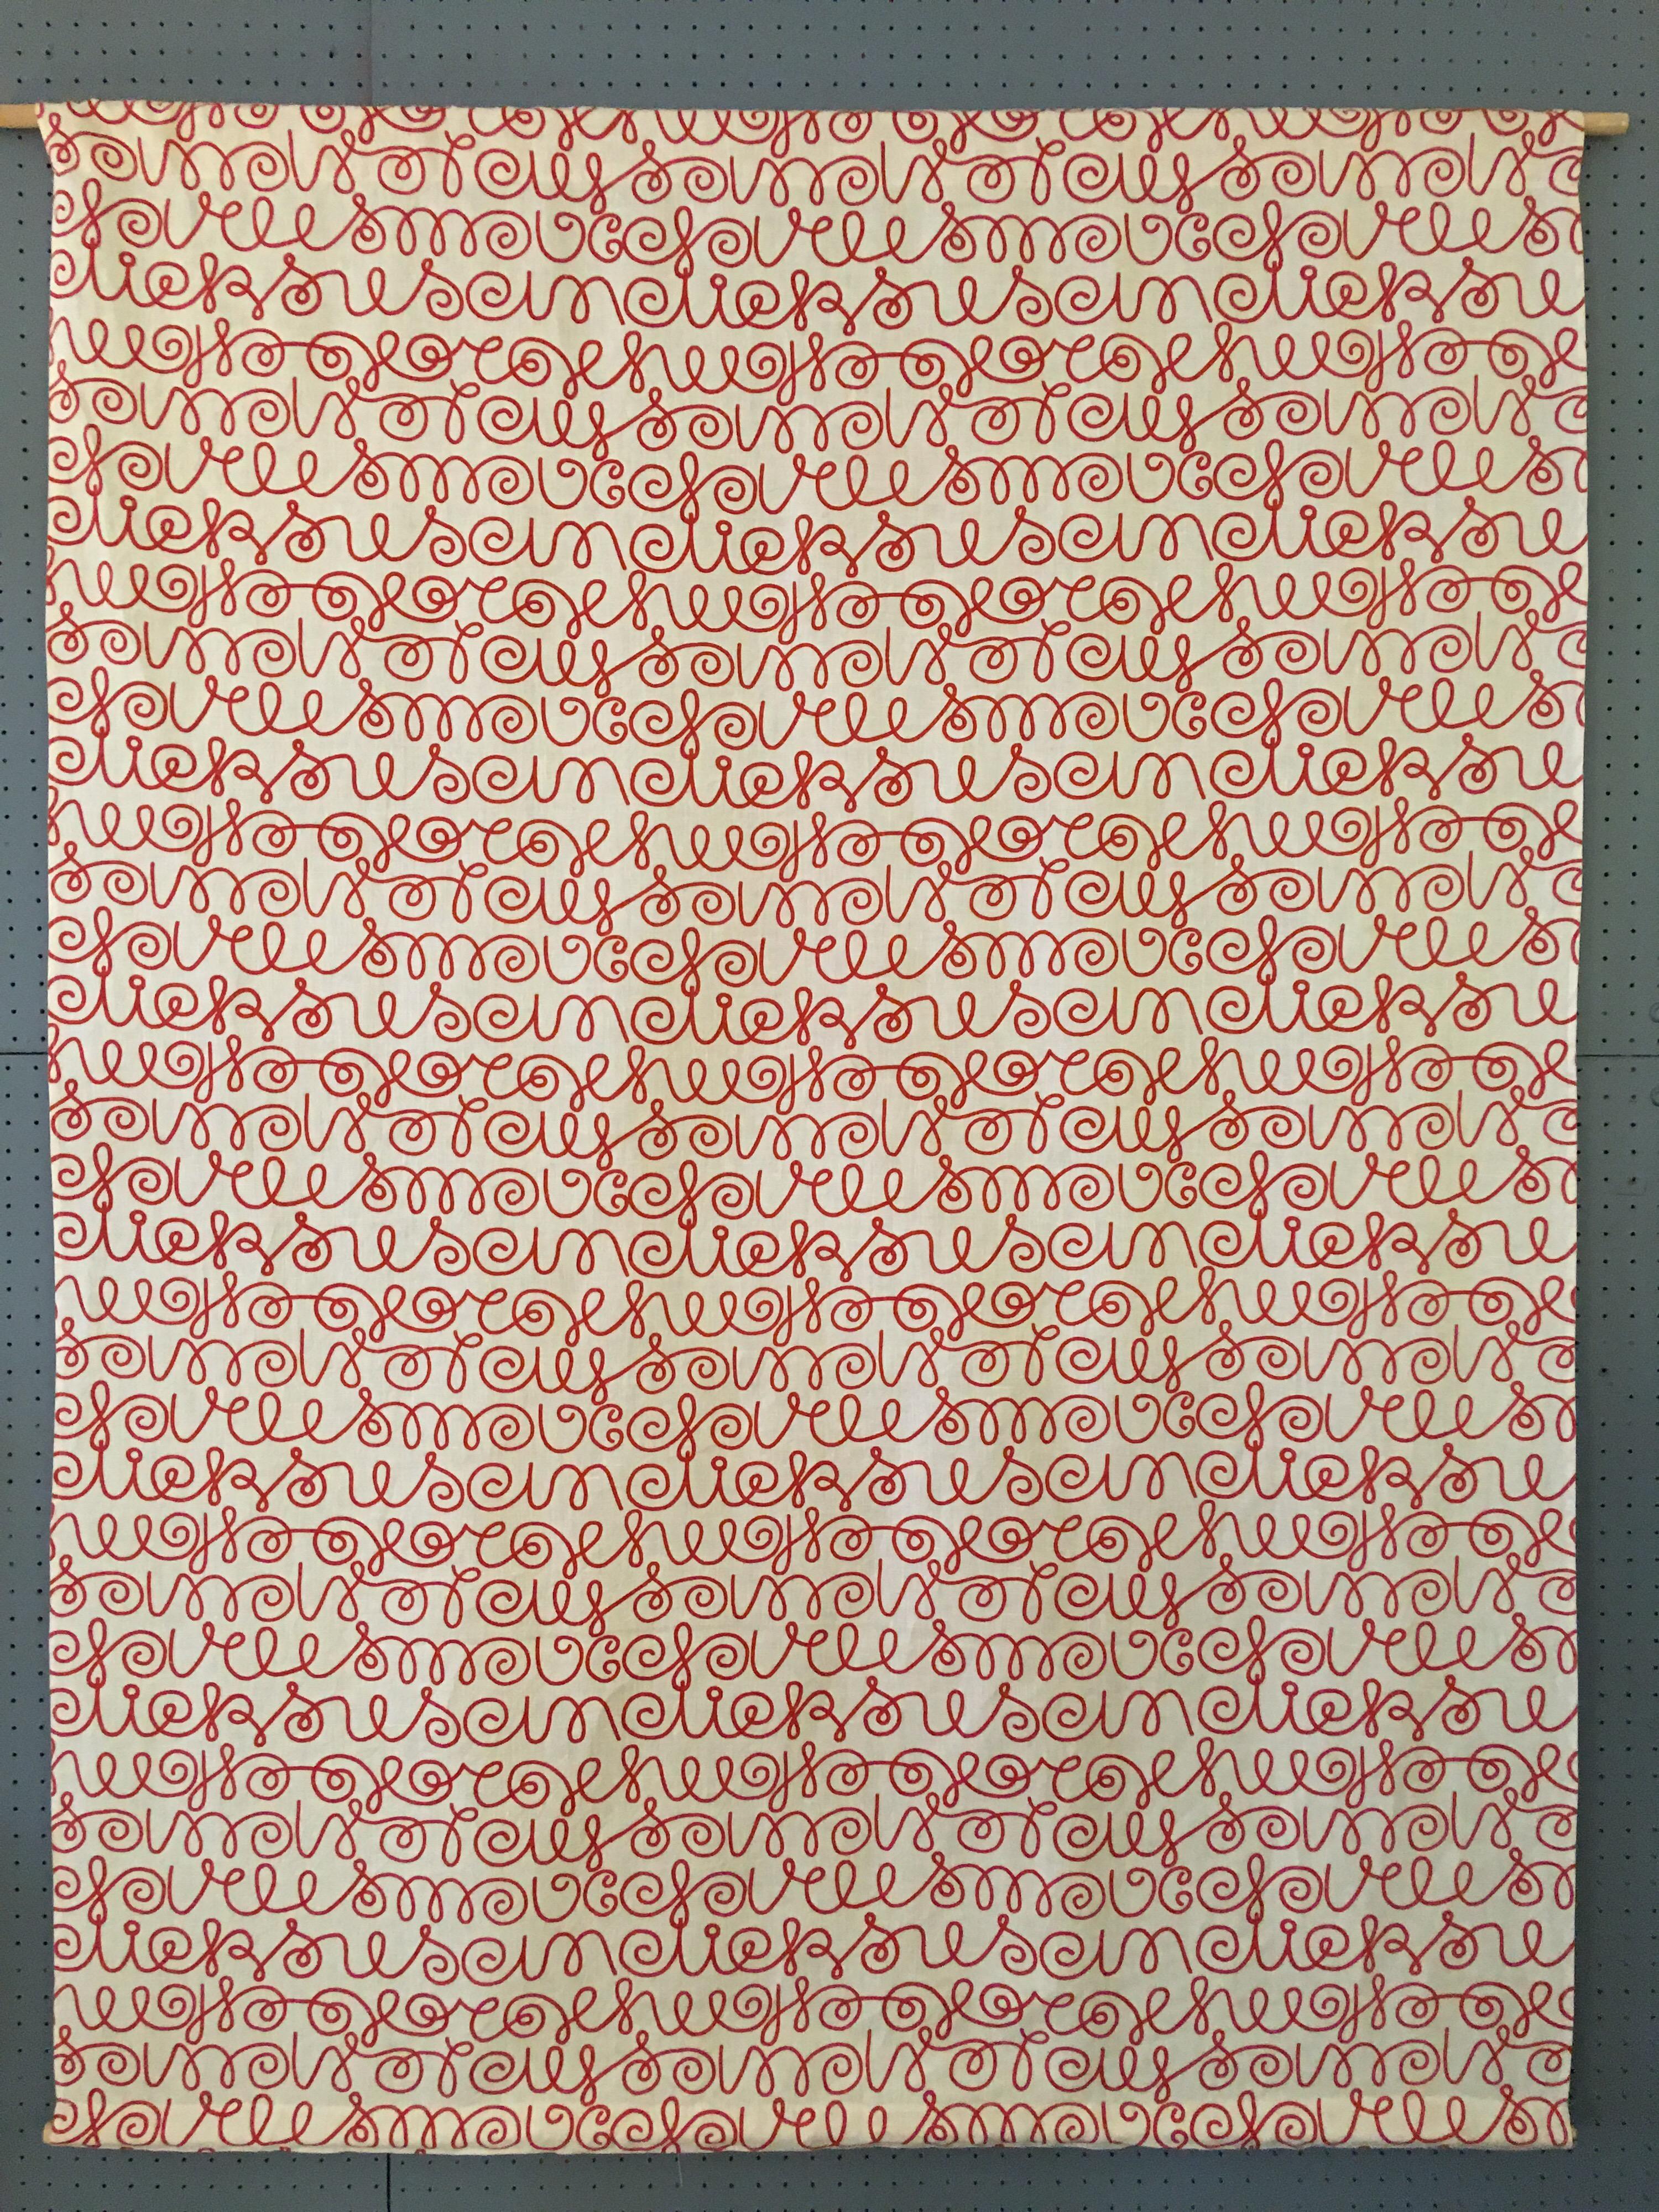 Alexander Girard Linen wall hanging in a cursive script pattern. Cream Linen background with red type. Herman Miller re-issued Girard fabrics 15-20 years ago.